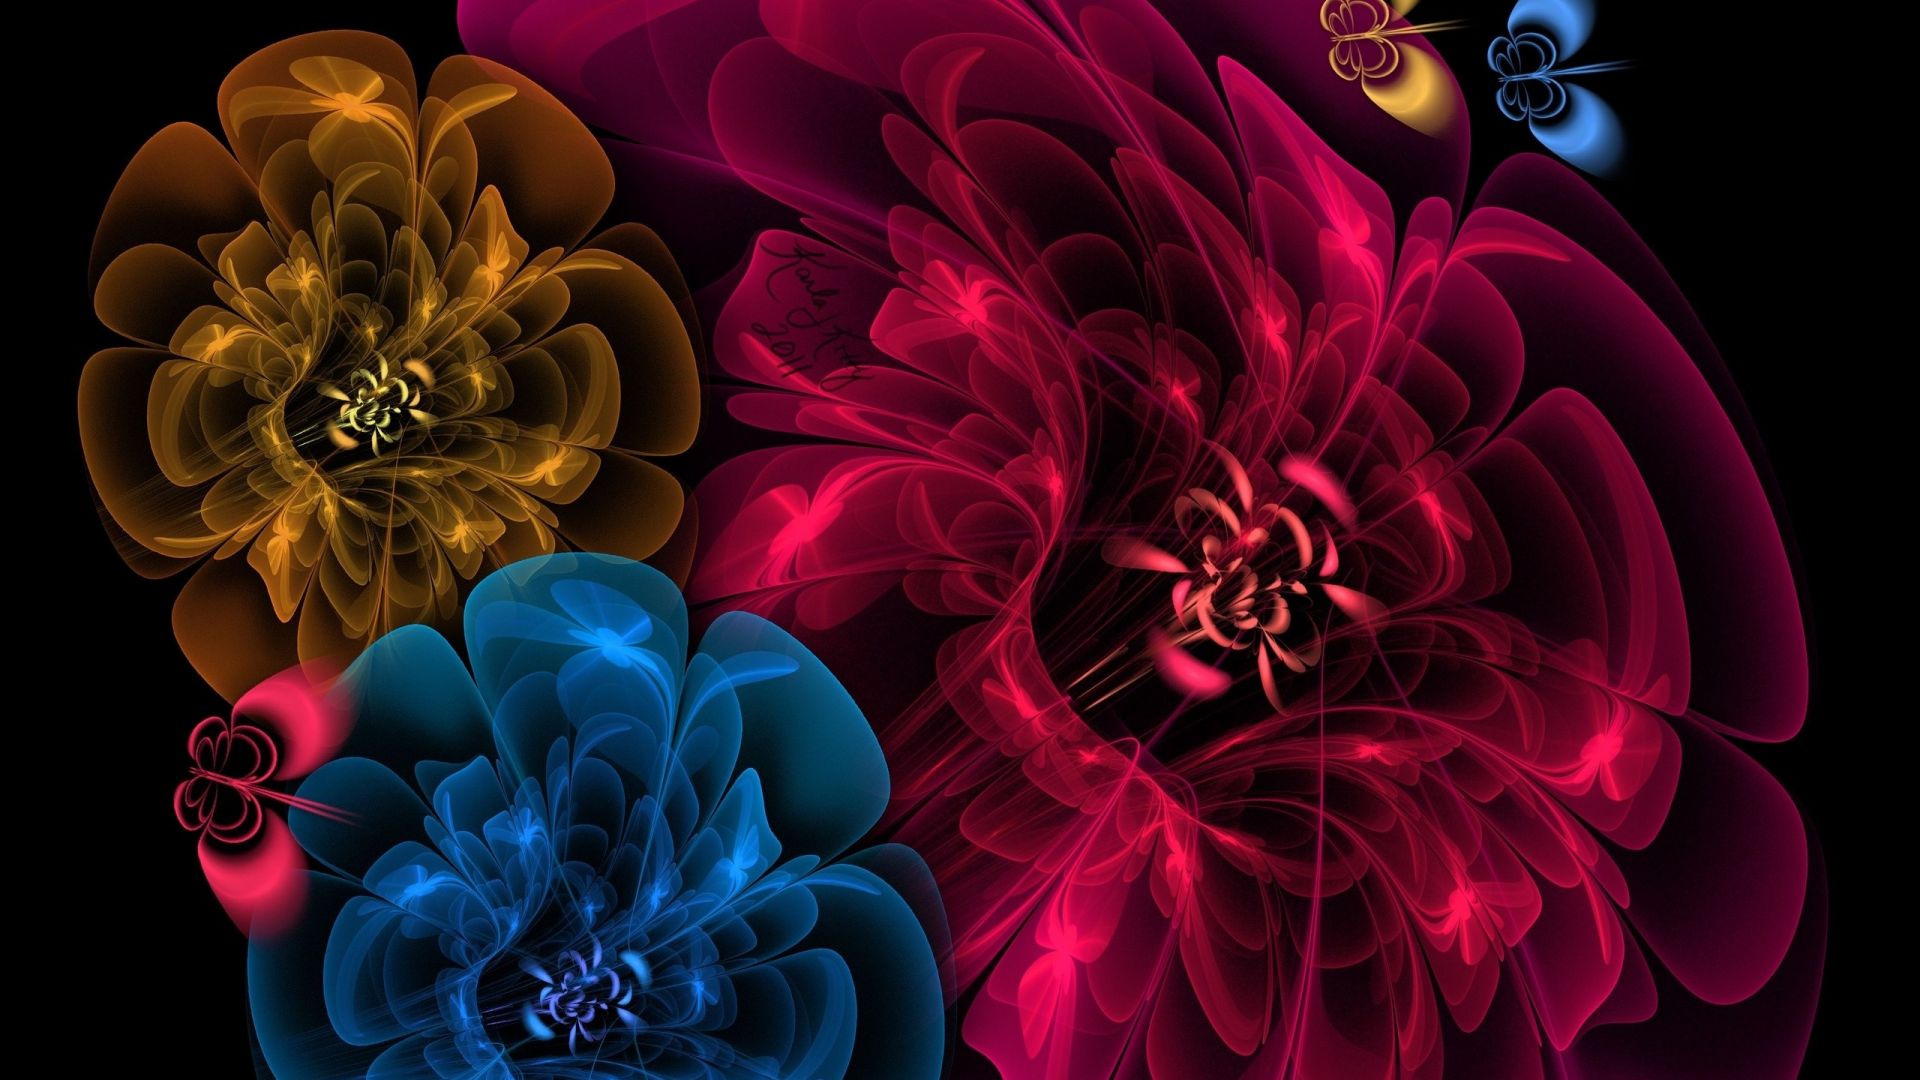 Abstract Roses Desktop Wallpapers